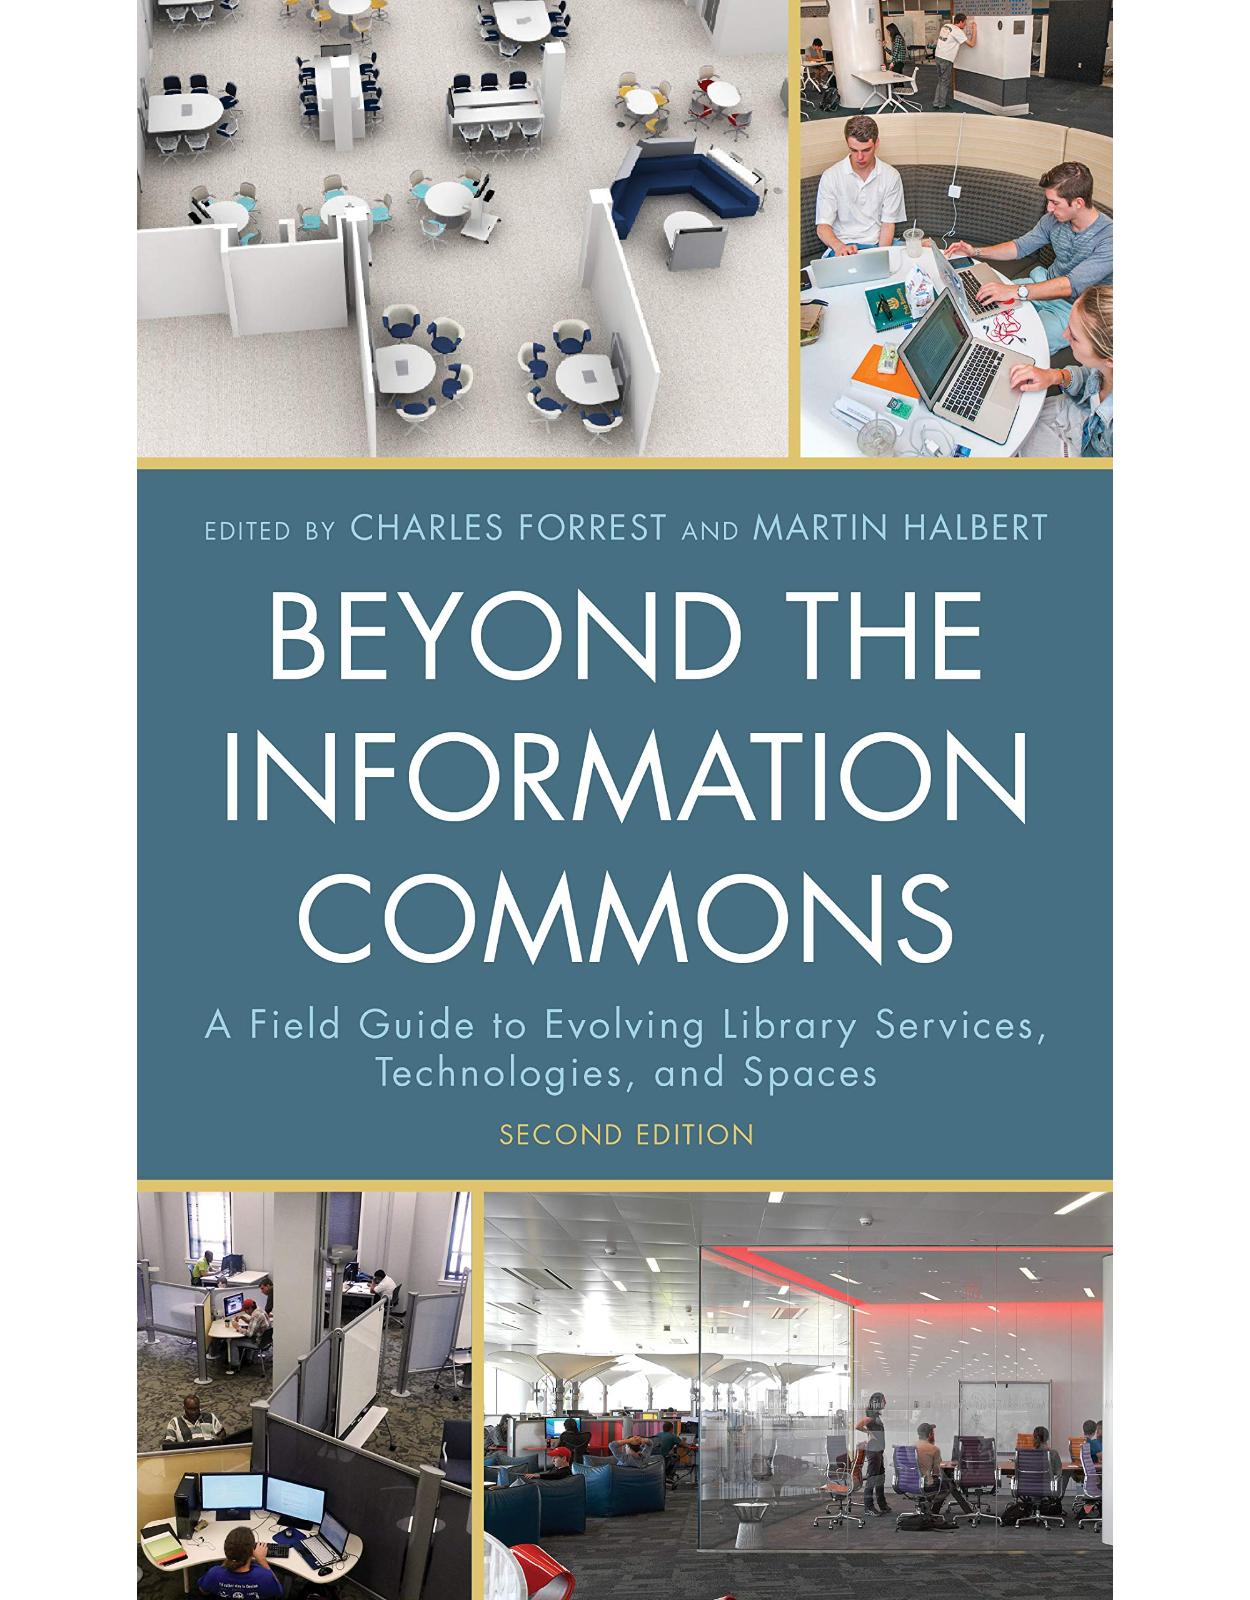 Beyond the Information Commons: A Field Guide to Evolving Library Services, Technologies, and Spaces 